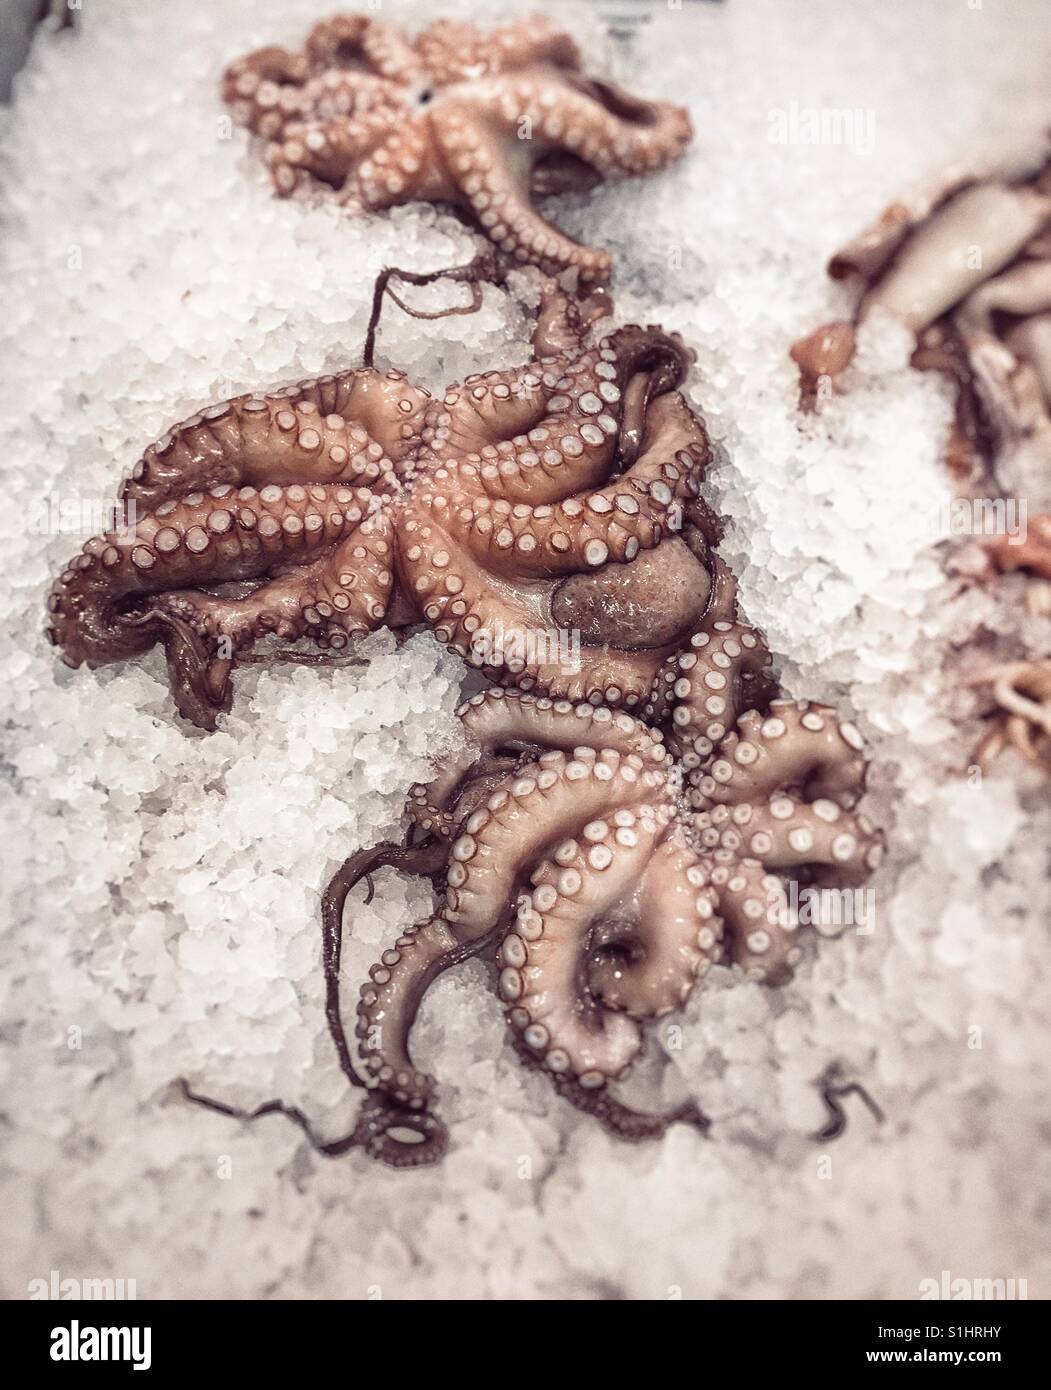 Octopi in a supermarket display Stock Photo